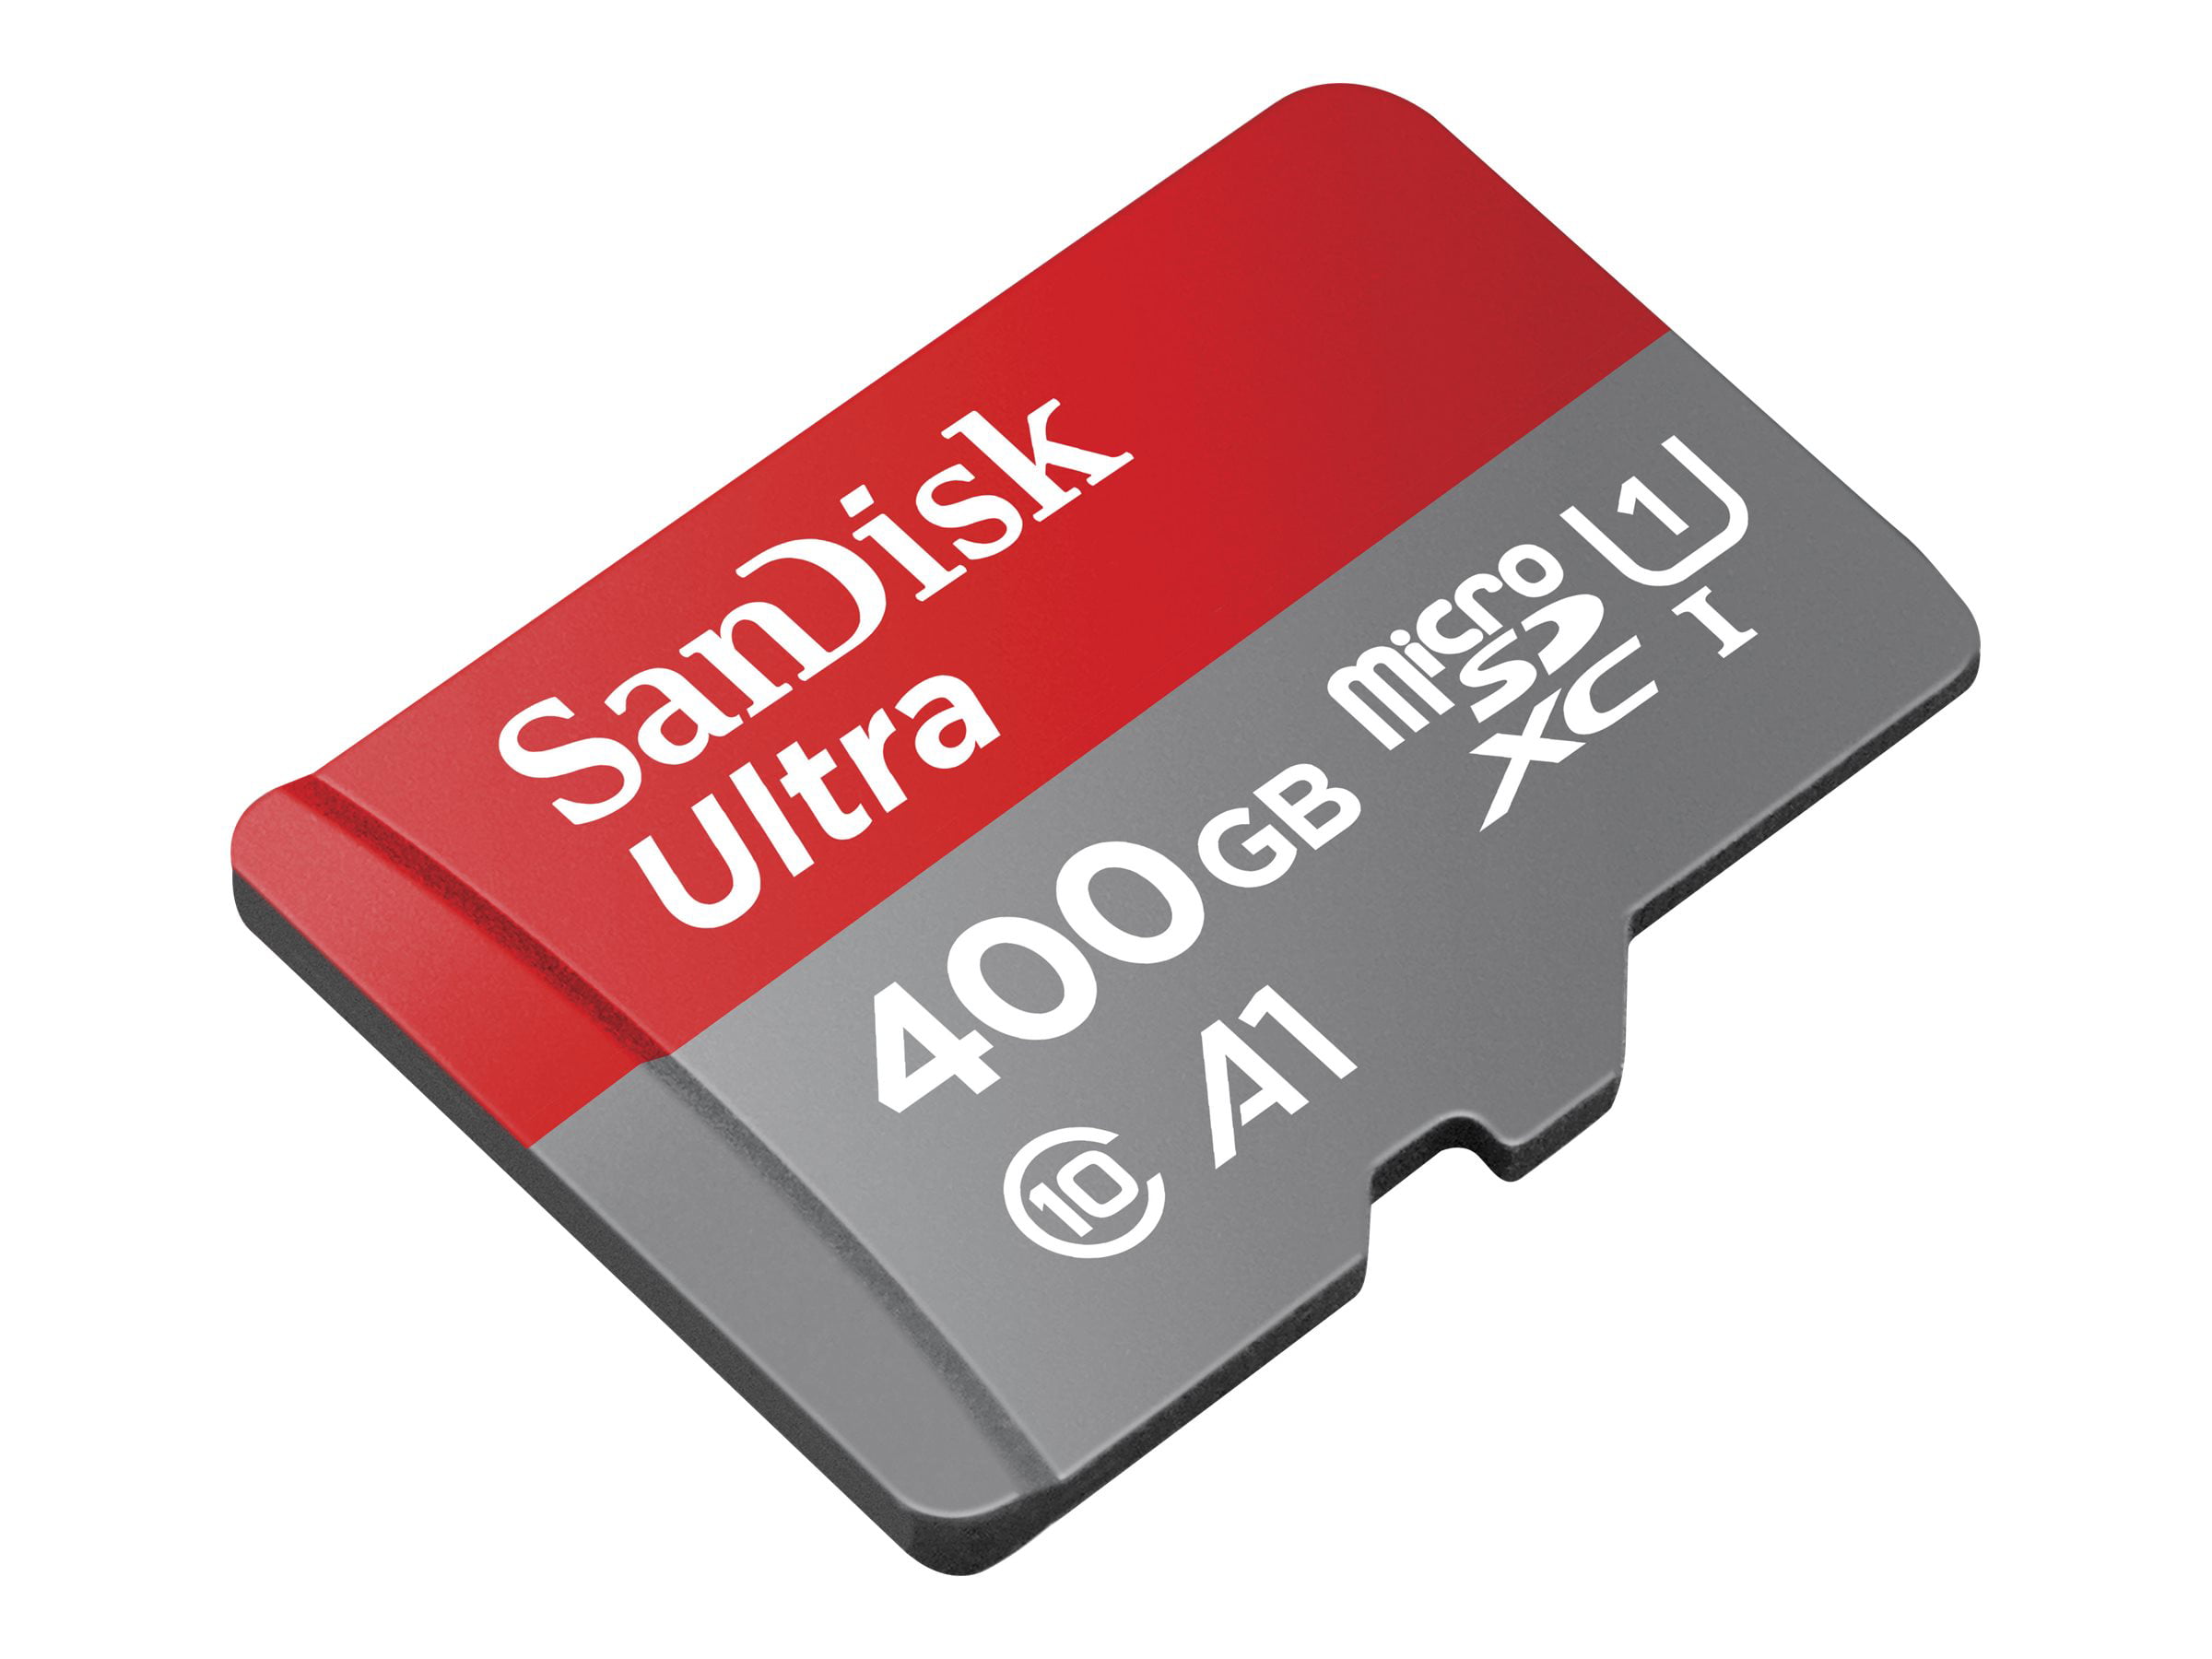 Android SanDisk Ultra 200GB MicroSDXC Verified for Lenovo Yoga Tablet 2 8-inch by SanFlash 100MBs A1 U1 C10 Works with SanDisk 